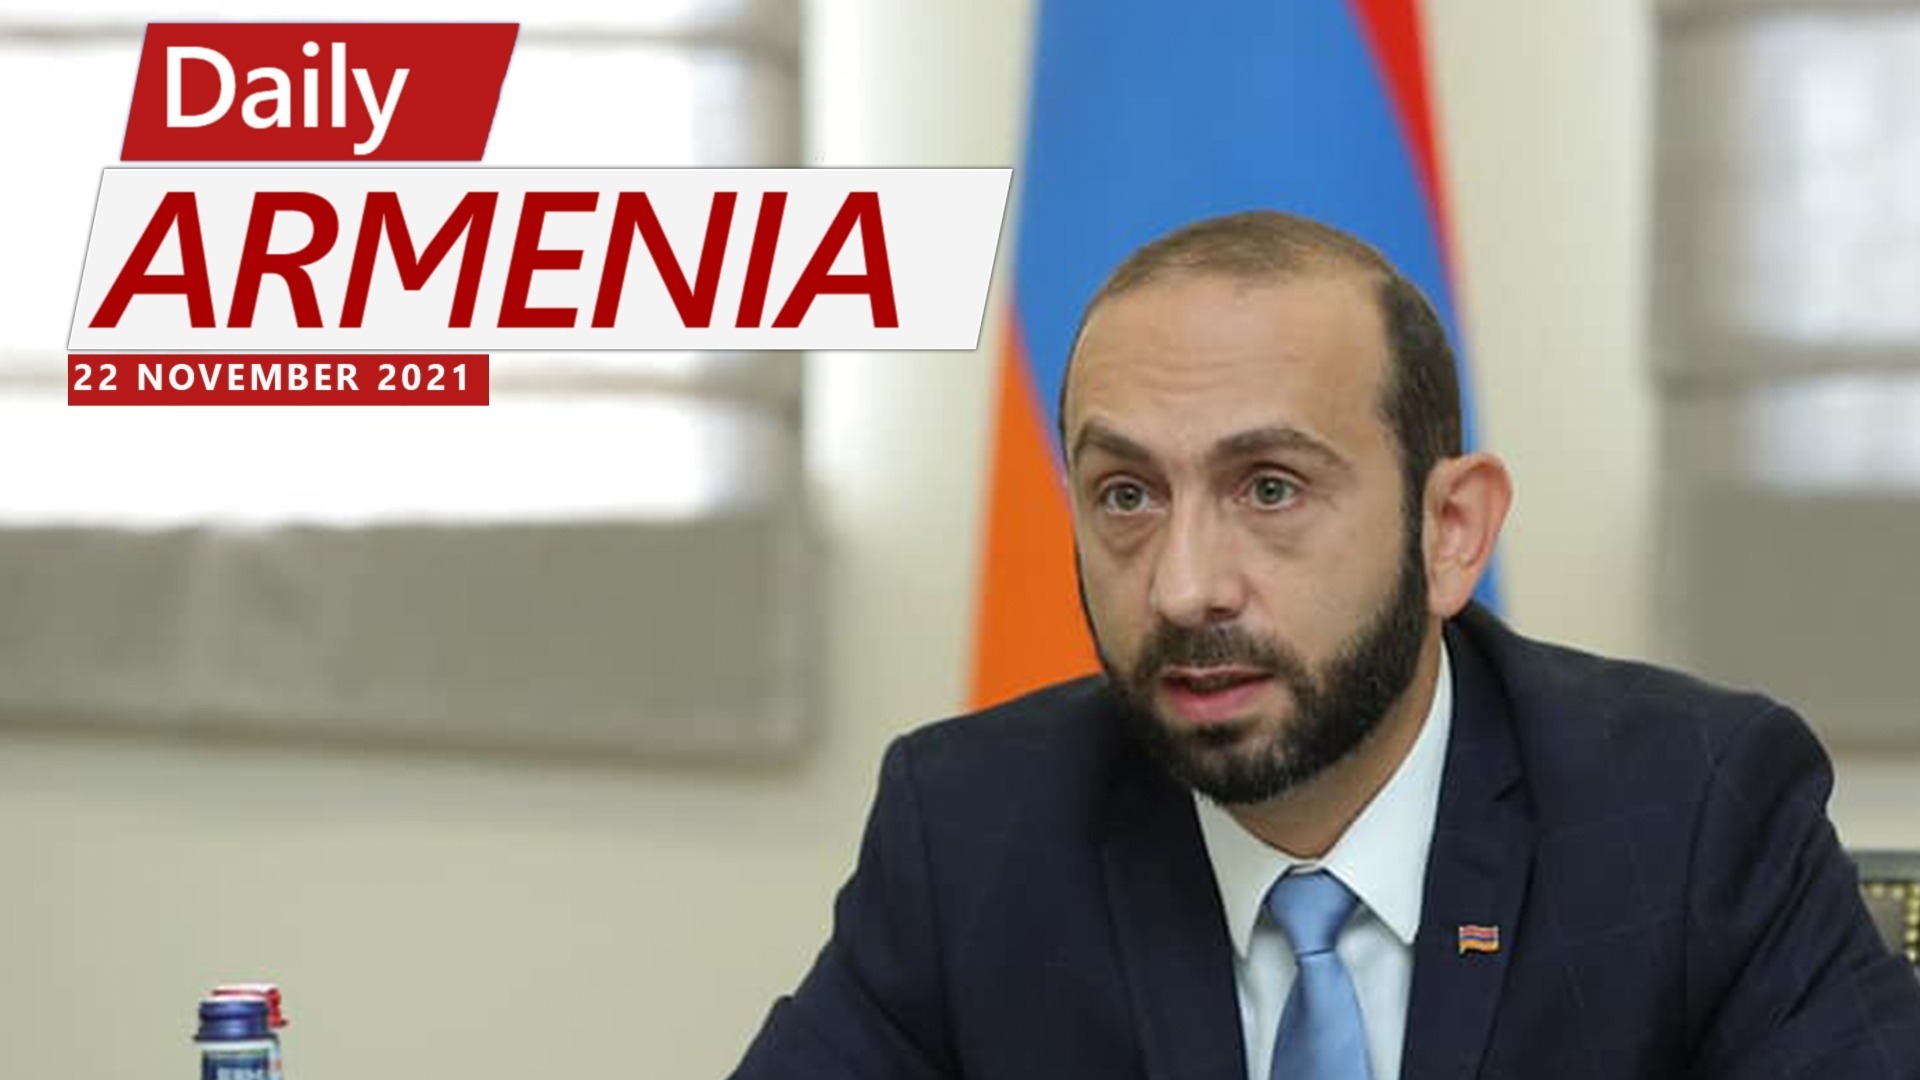 Turkey setting “corridor” as a new precondition for normalization, says Armenian foreign minister